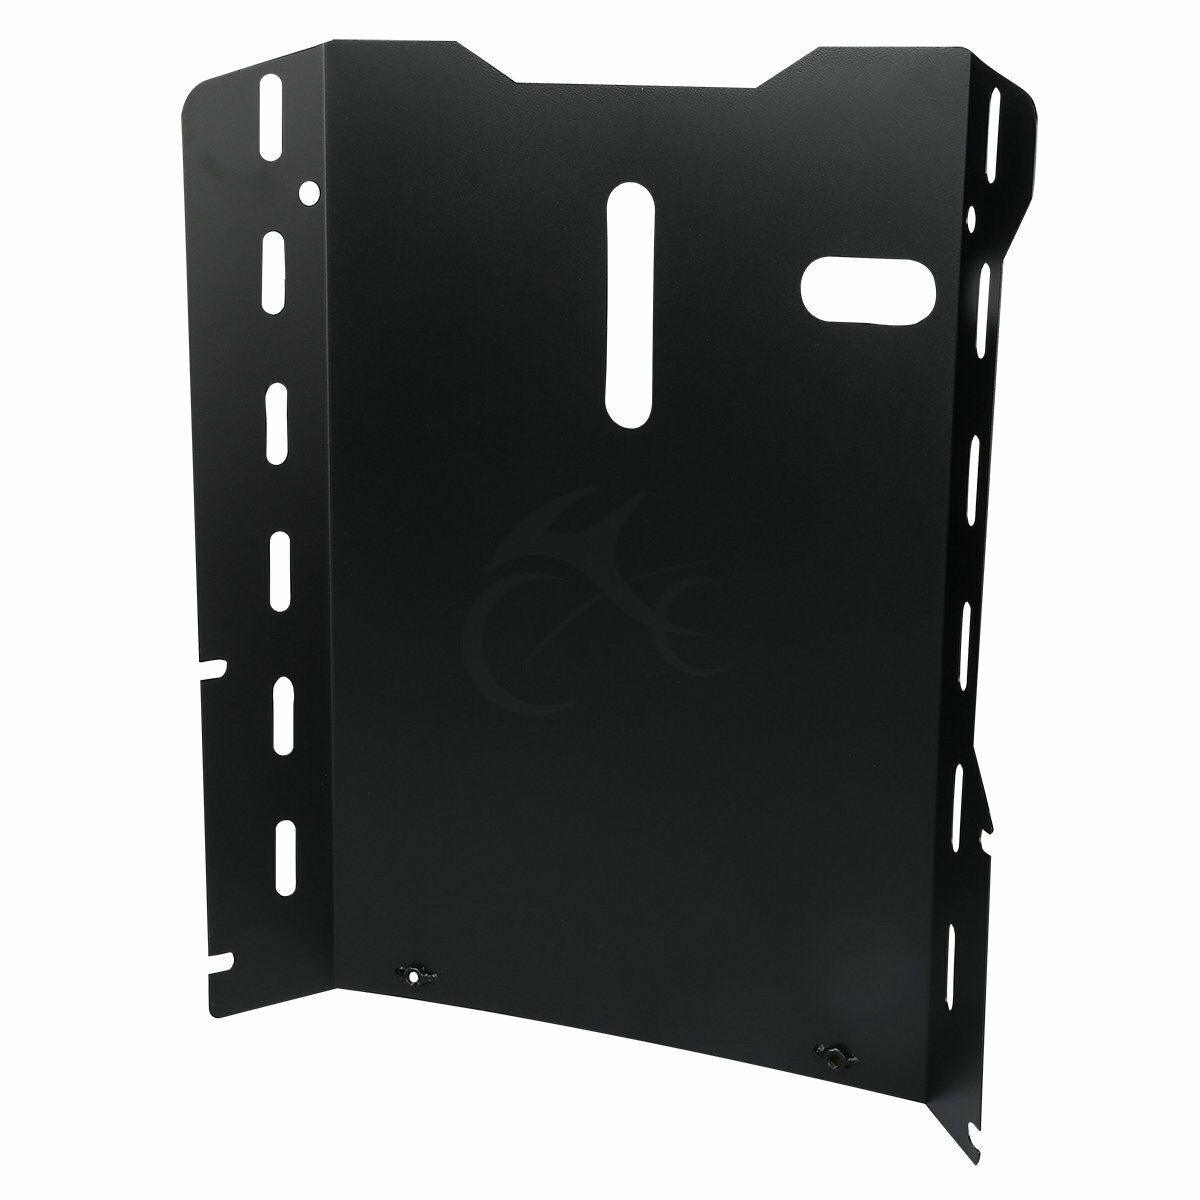 Belly Pan Engine Plates Cover Fit For Honda Goldwing GL1800 01-17 F6B 13-17 2015 - Moto Life Products